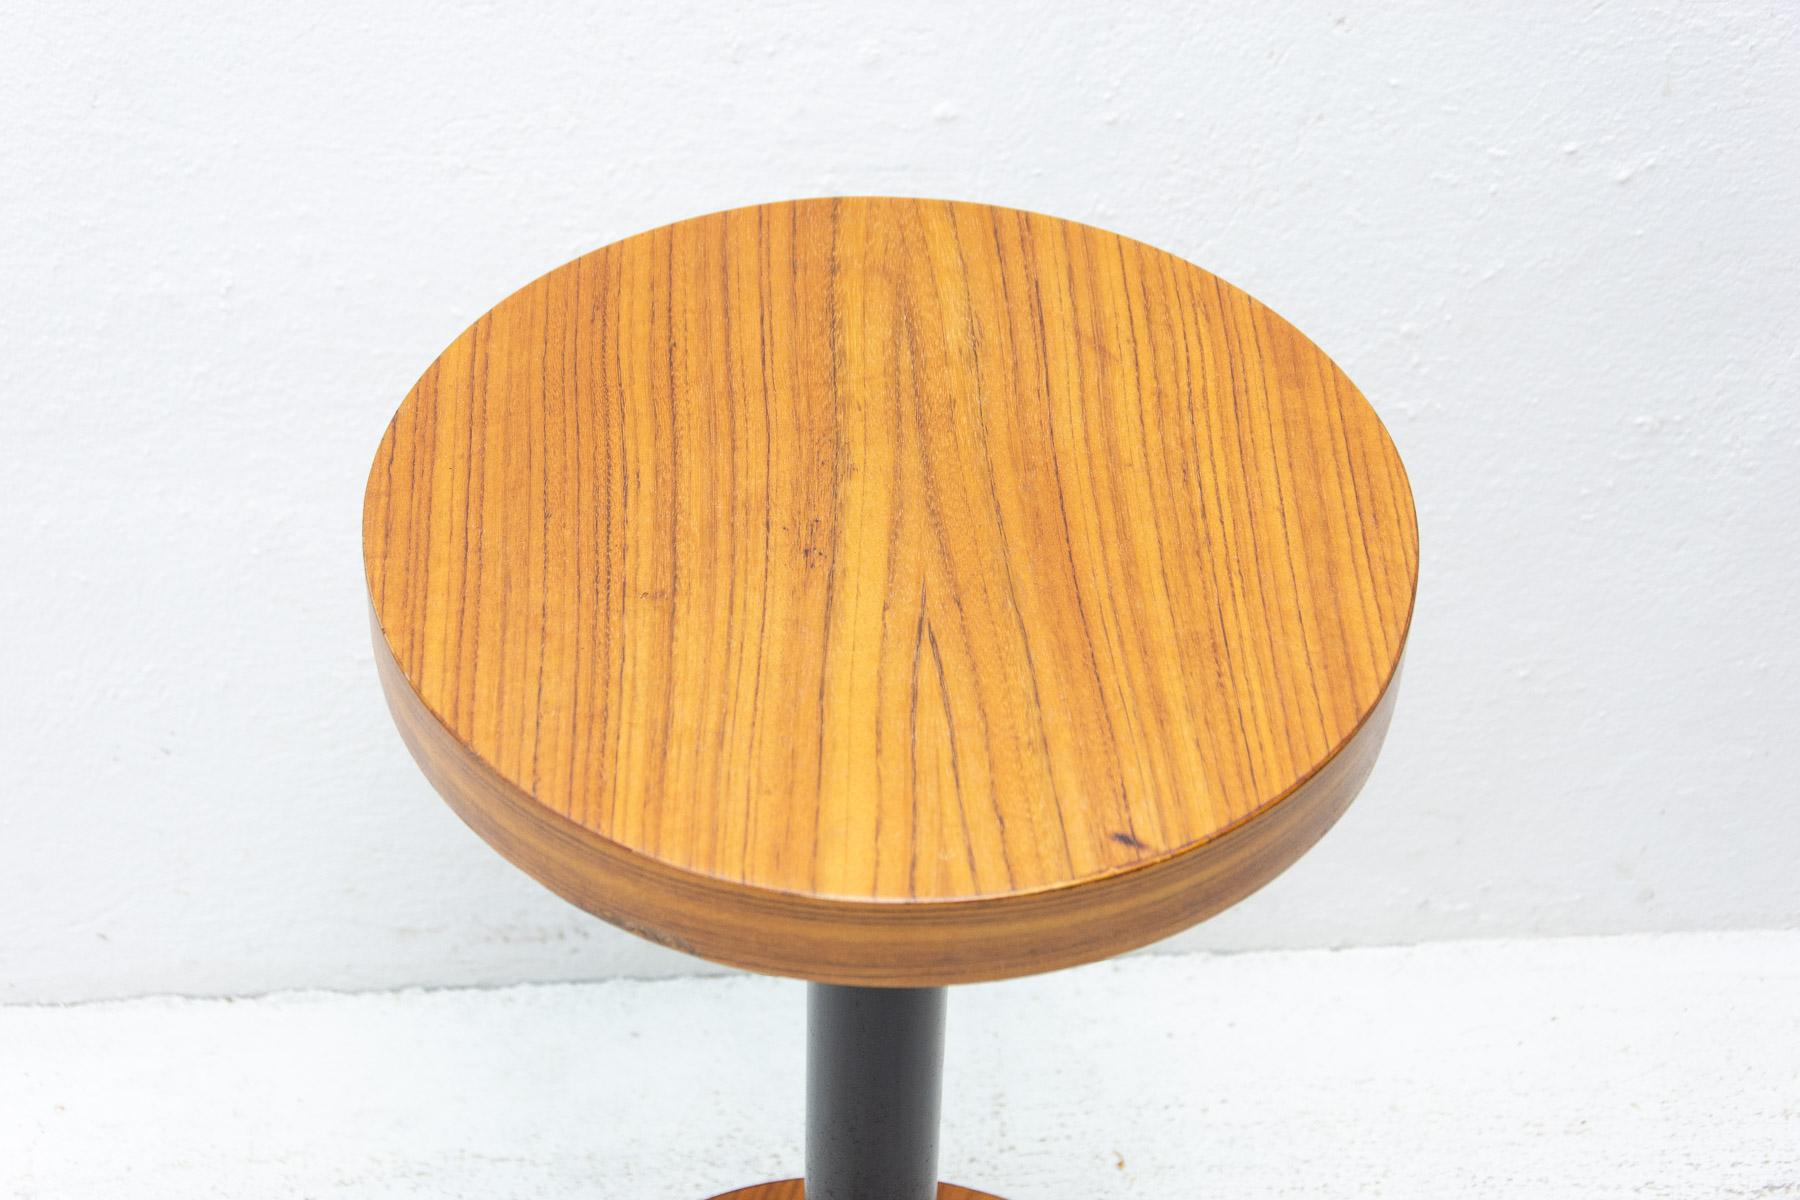 Art Deco Cherry Wood Round Side Table, Bohemia, 1930s For Sale 1